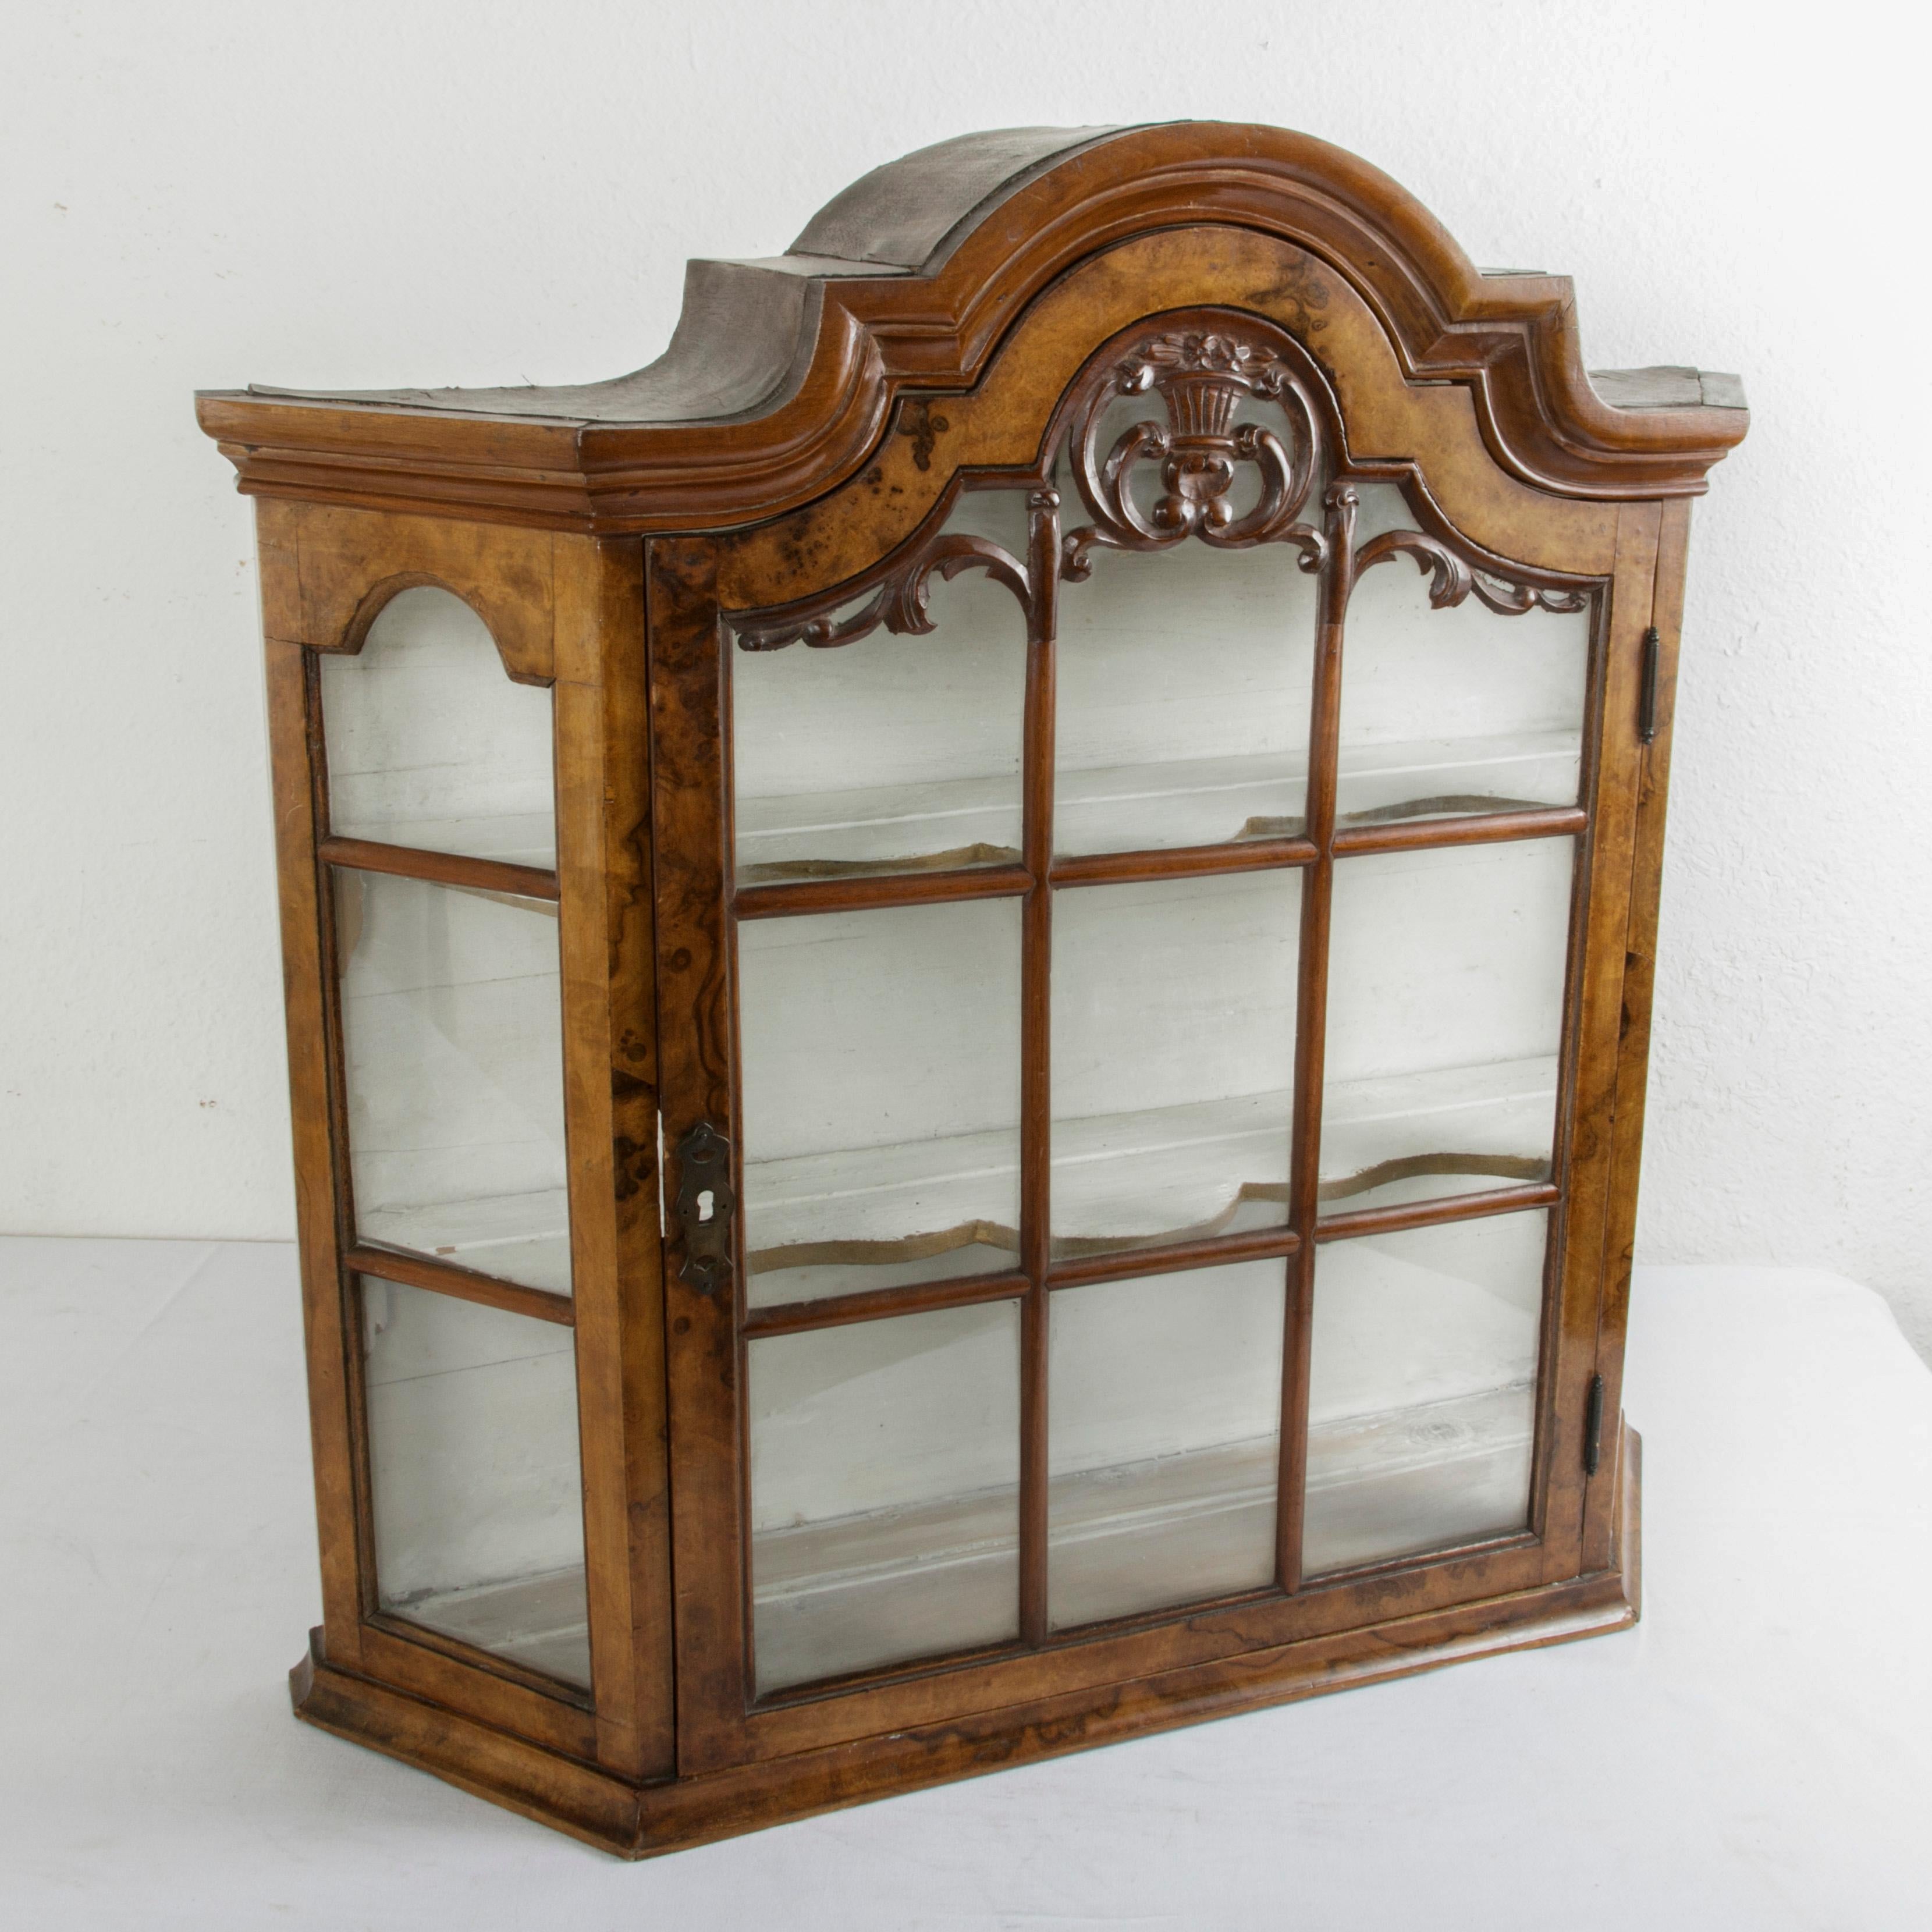 This Dutch wall vitrine or tabletop display cabinet from the late 19th century features a solid walnut case and its original glass panes on three sides set into mullions. The top of the door at the front is detailed with a central hand carved